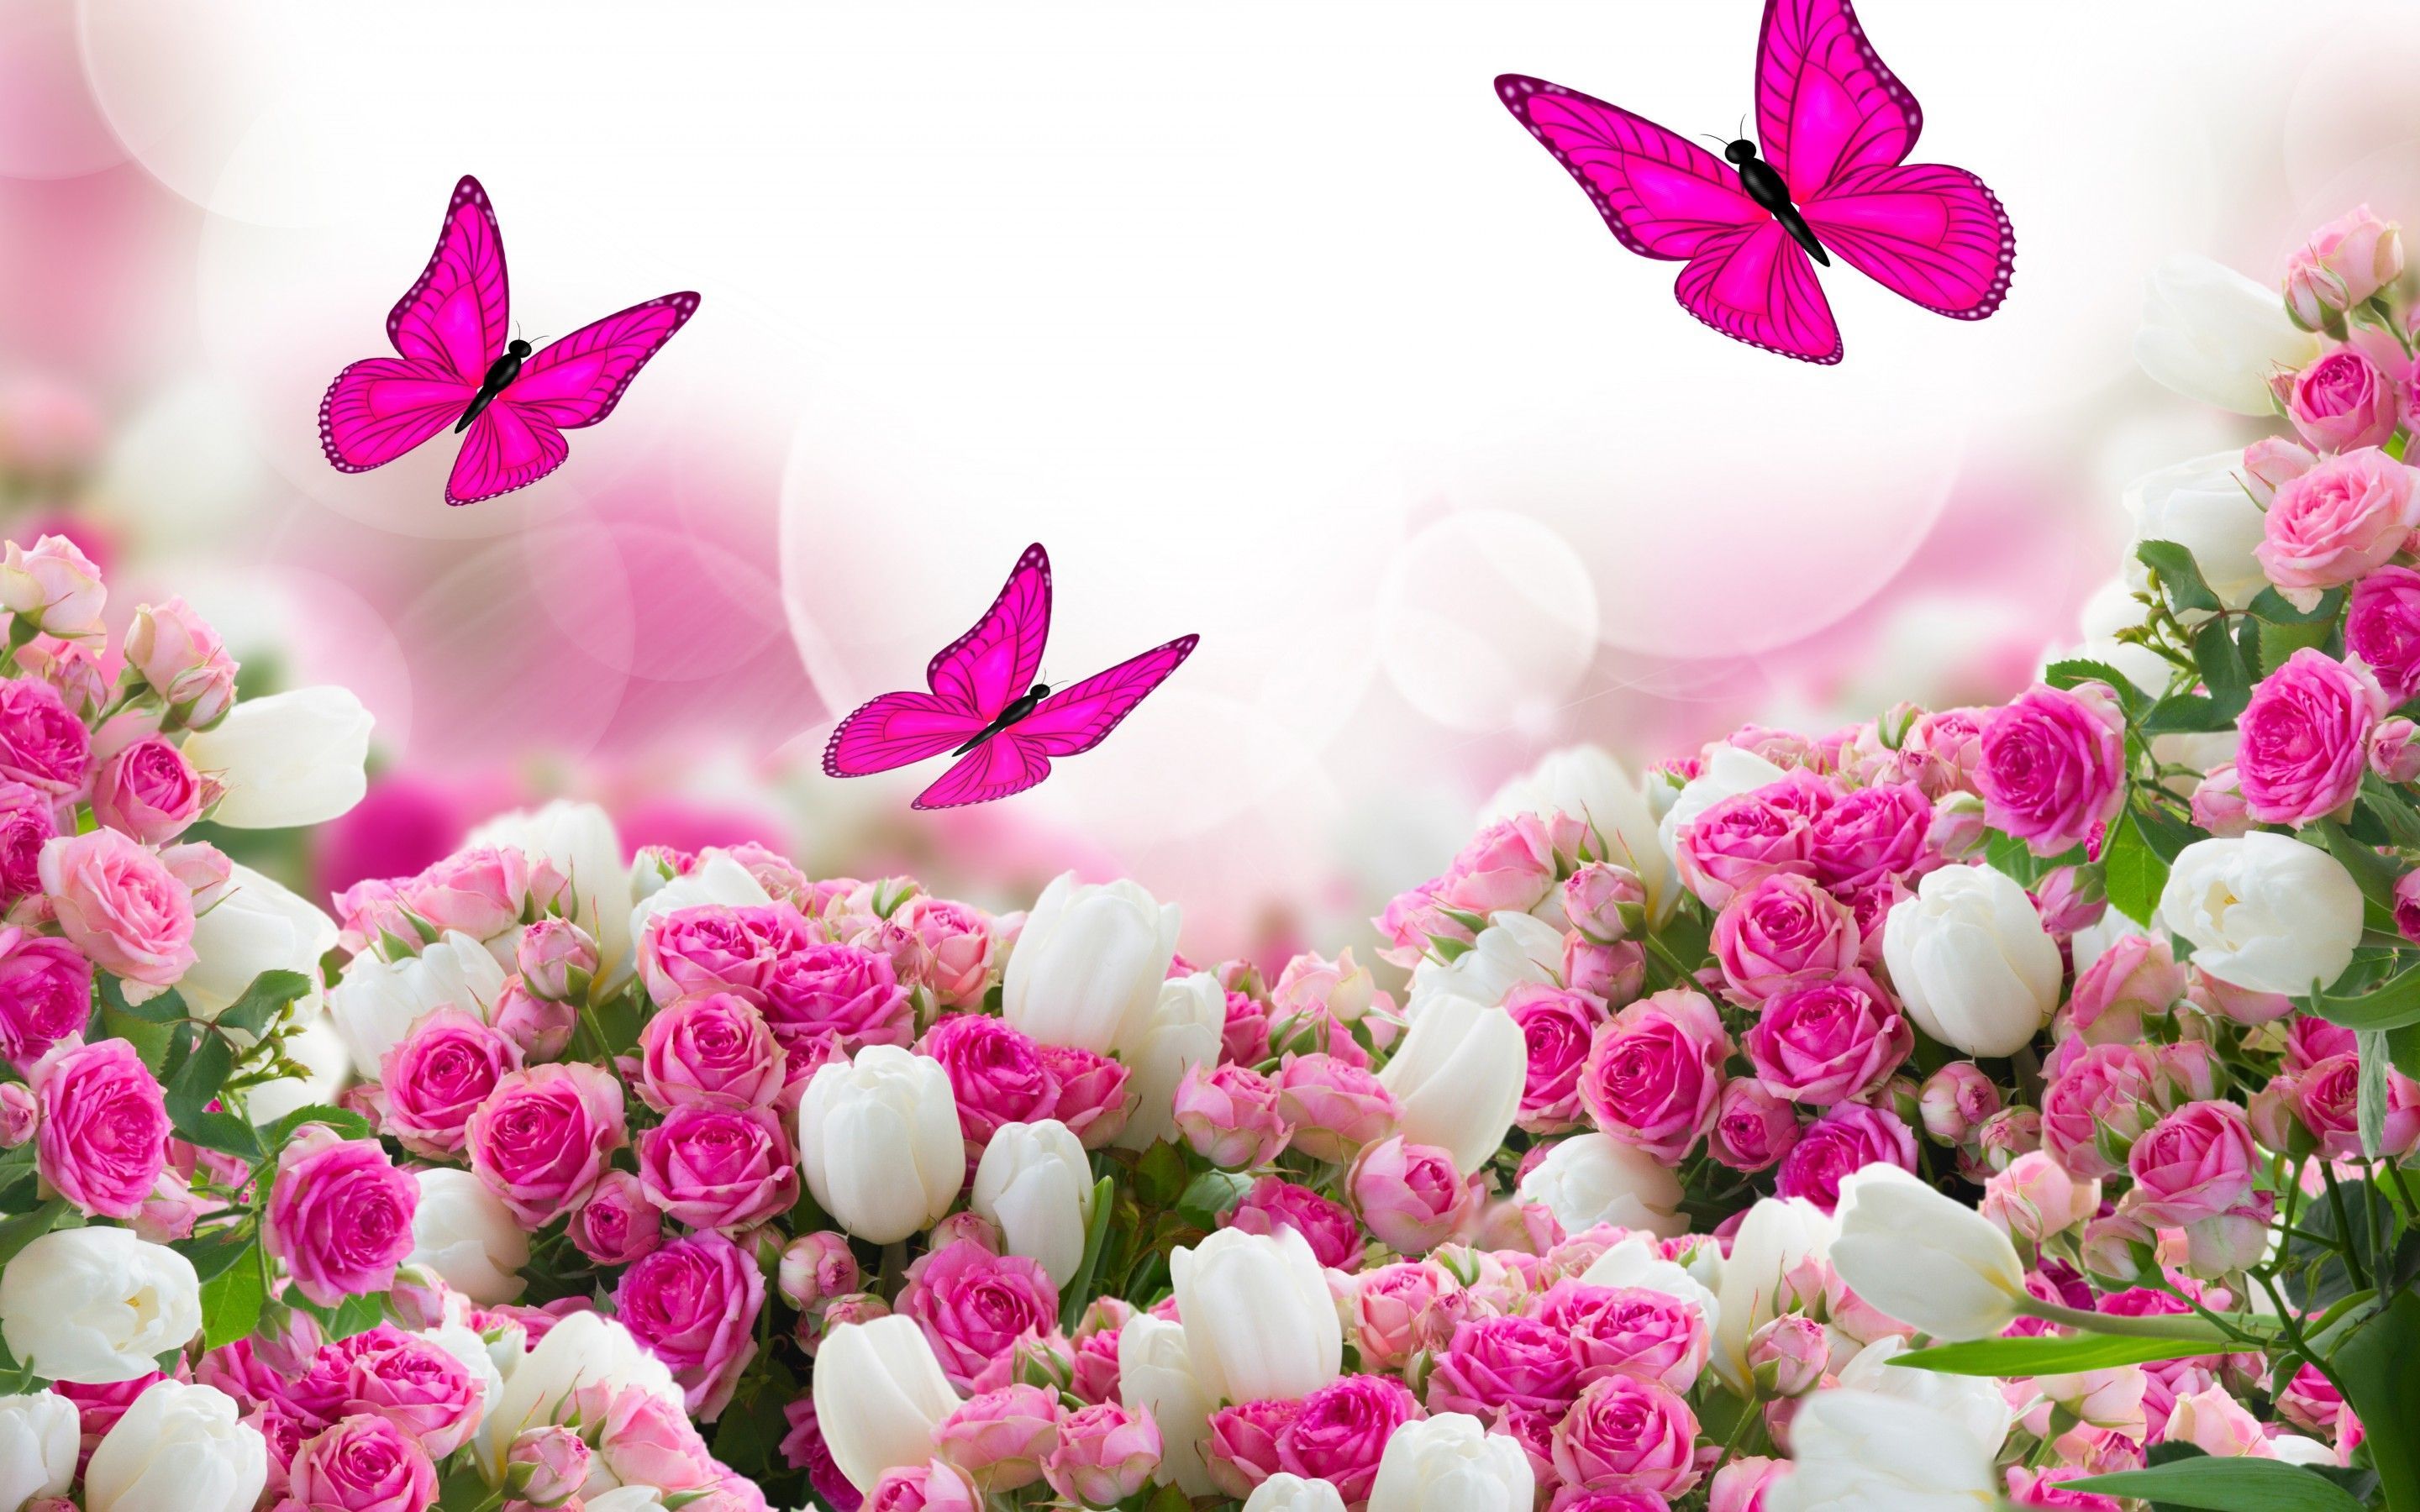 Free download 60 Pink Roses and Butterfly Wallpaper Download at